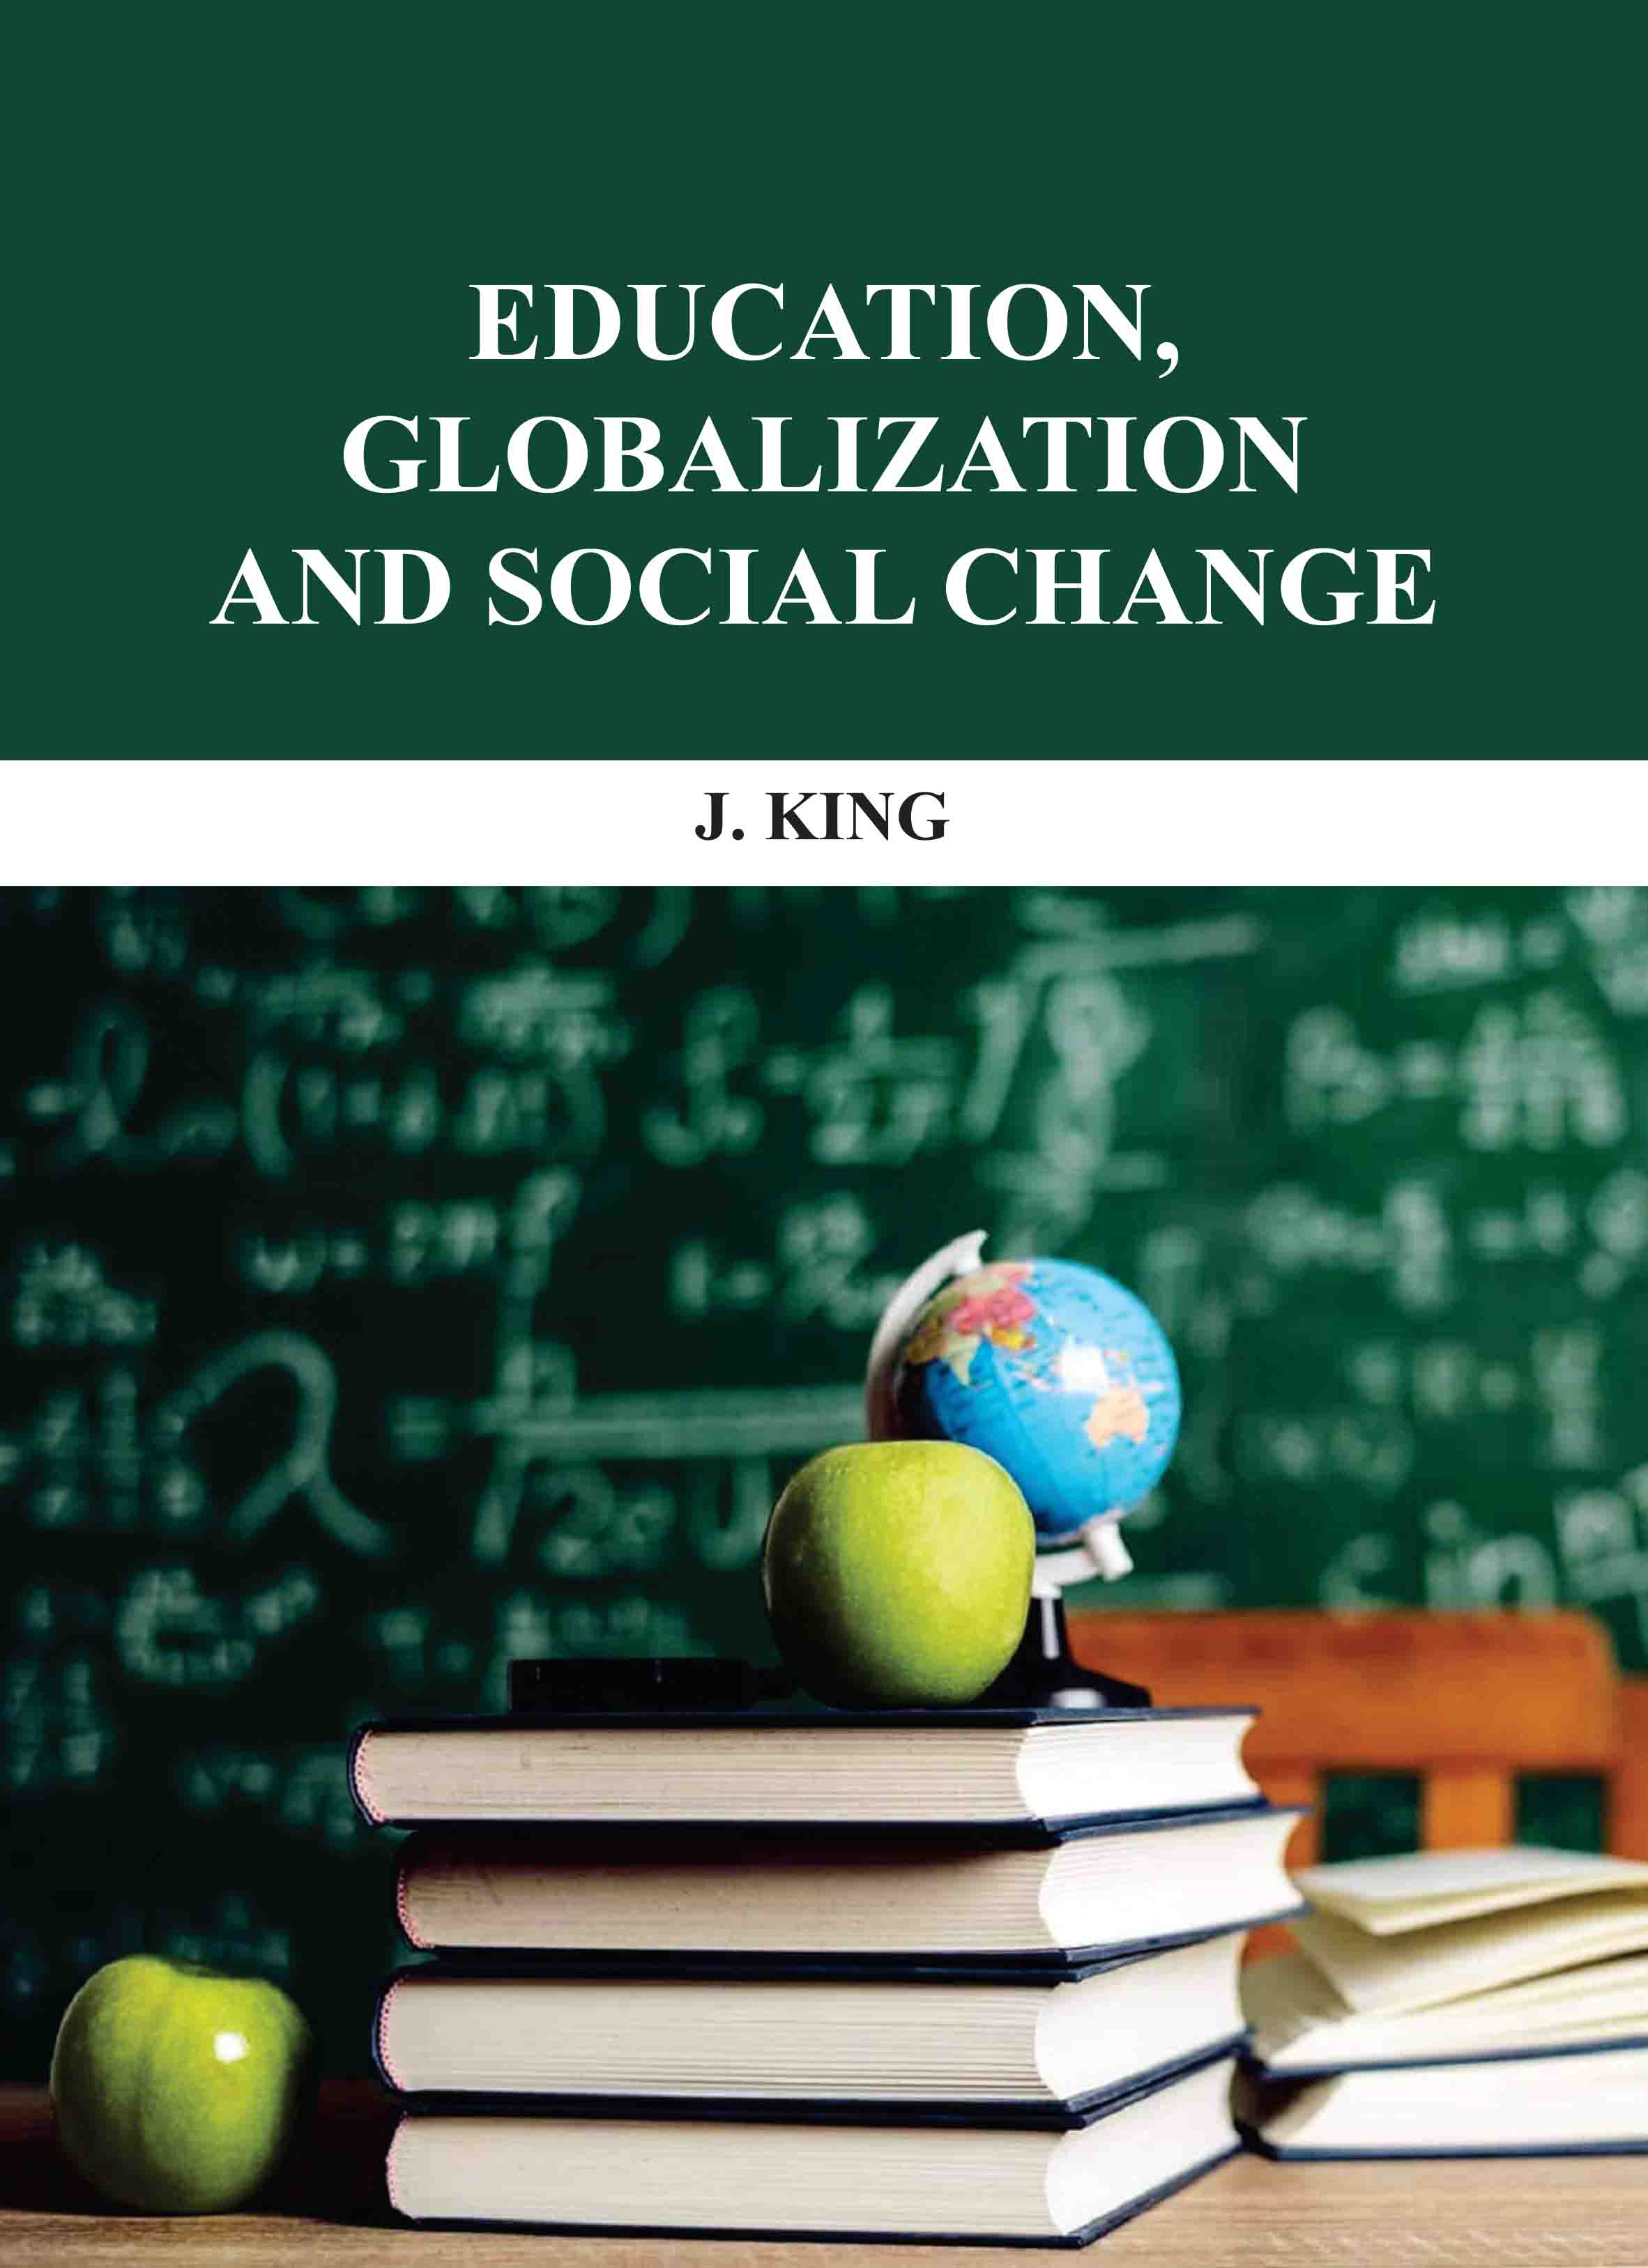 Education, Globalization, and Social Change